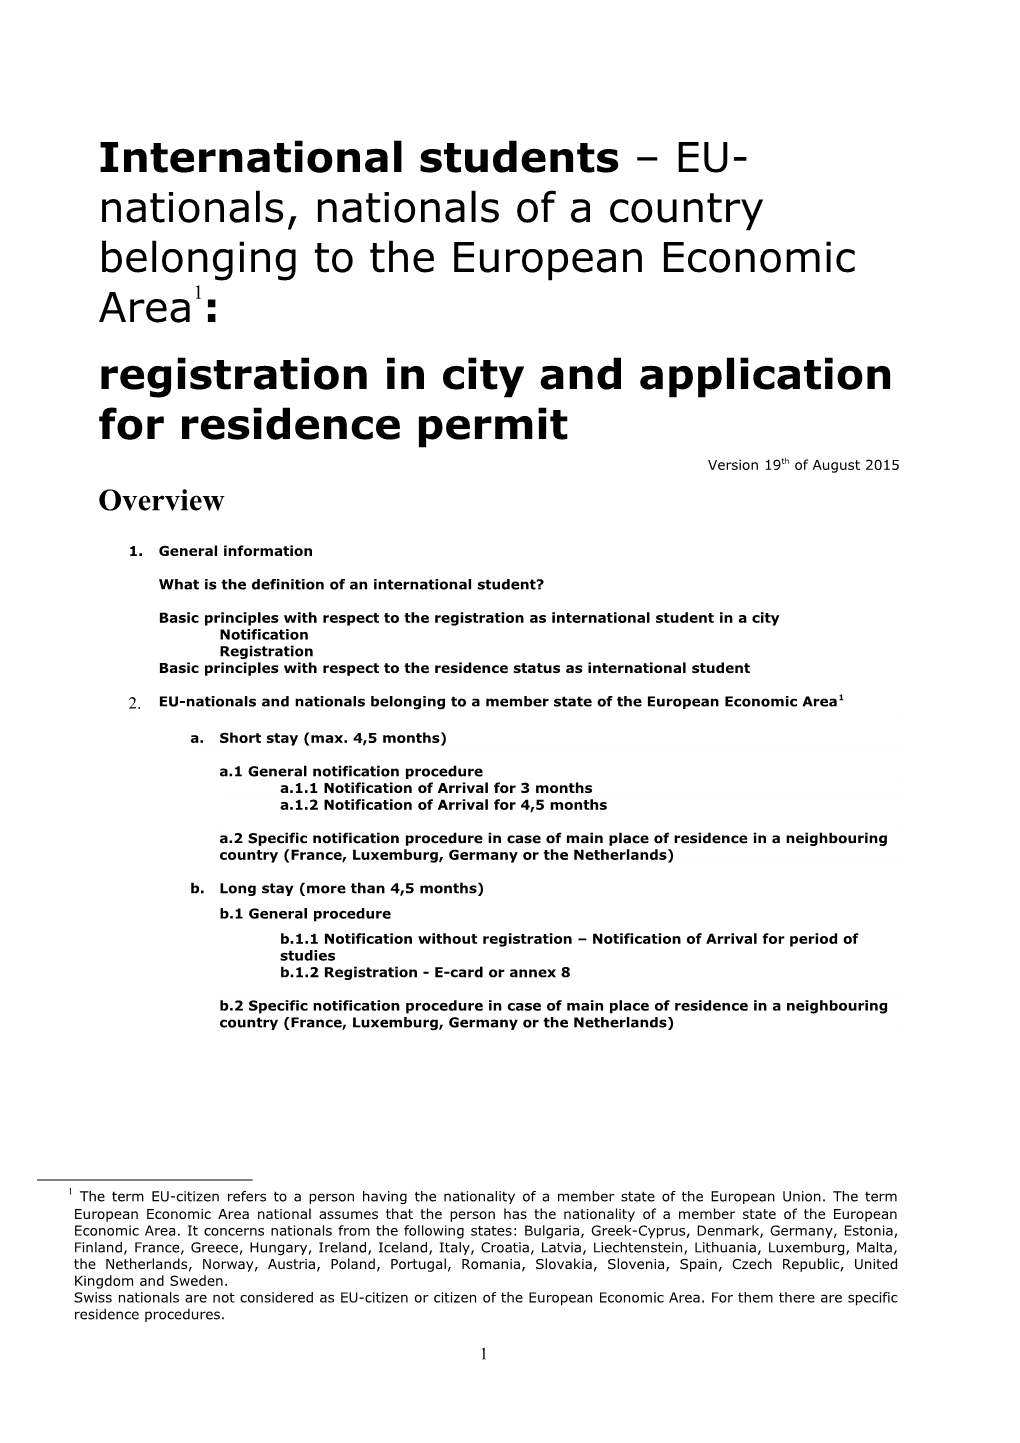 Registration in City and Application for Residence Permit